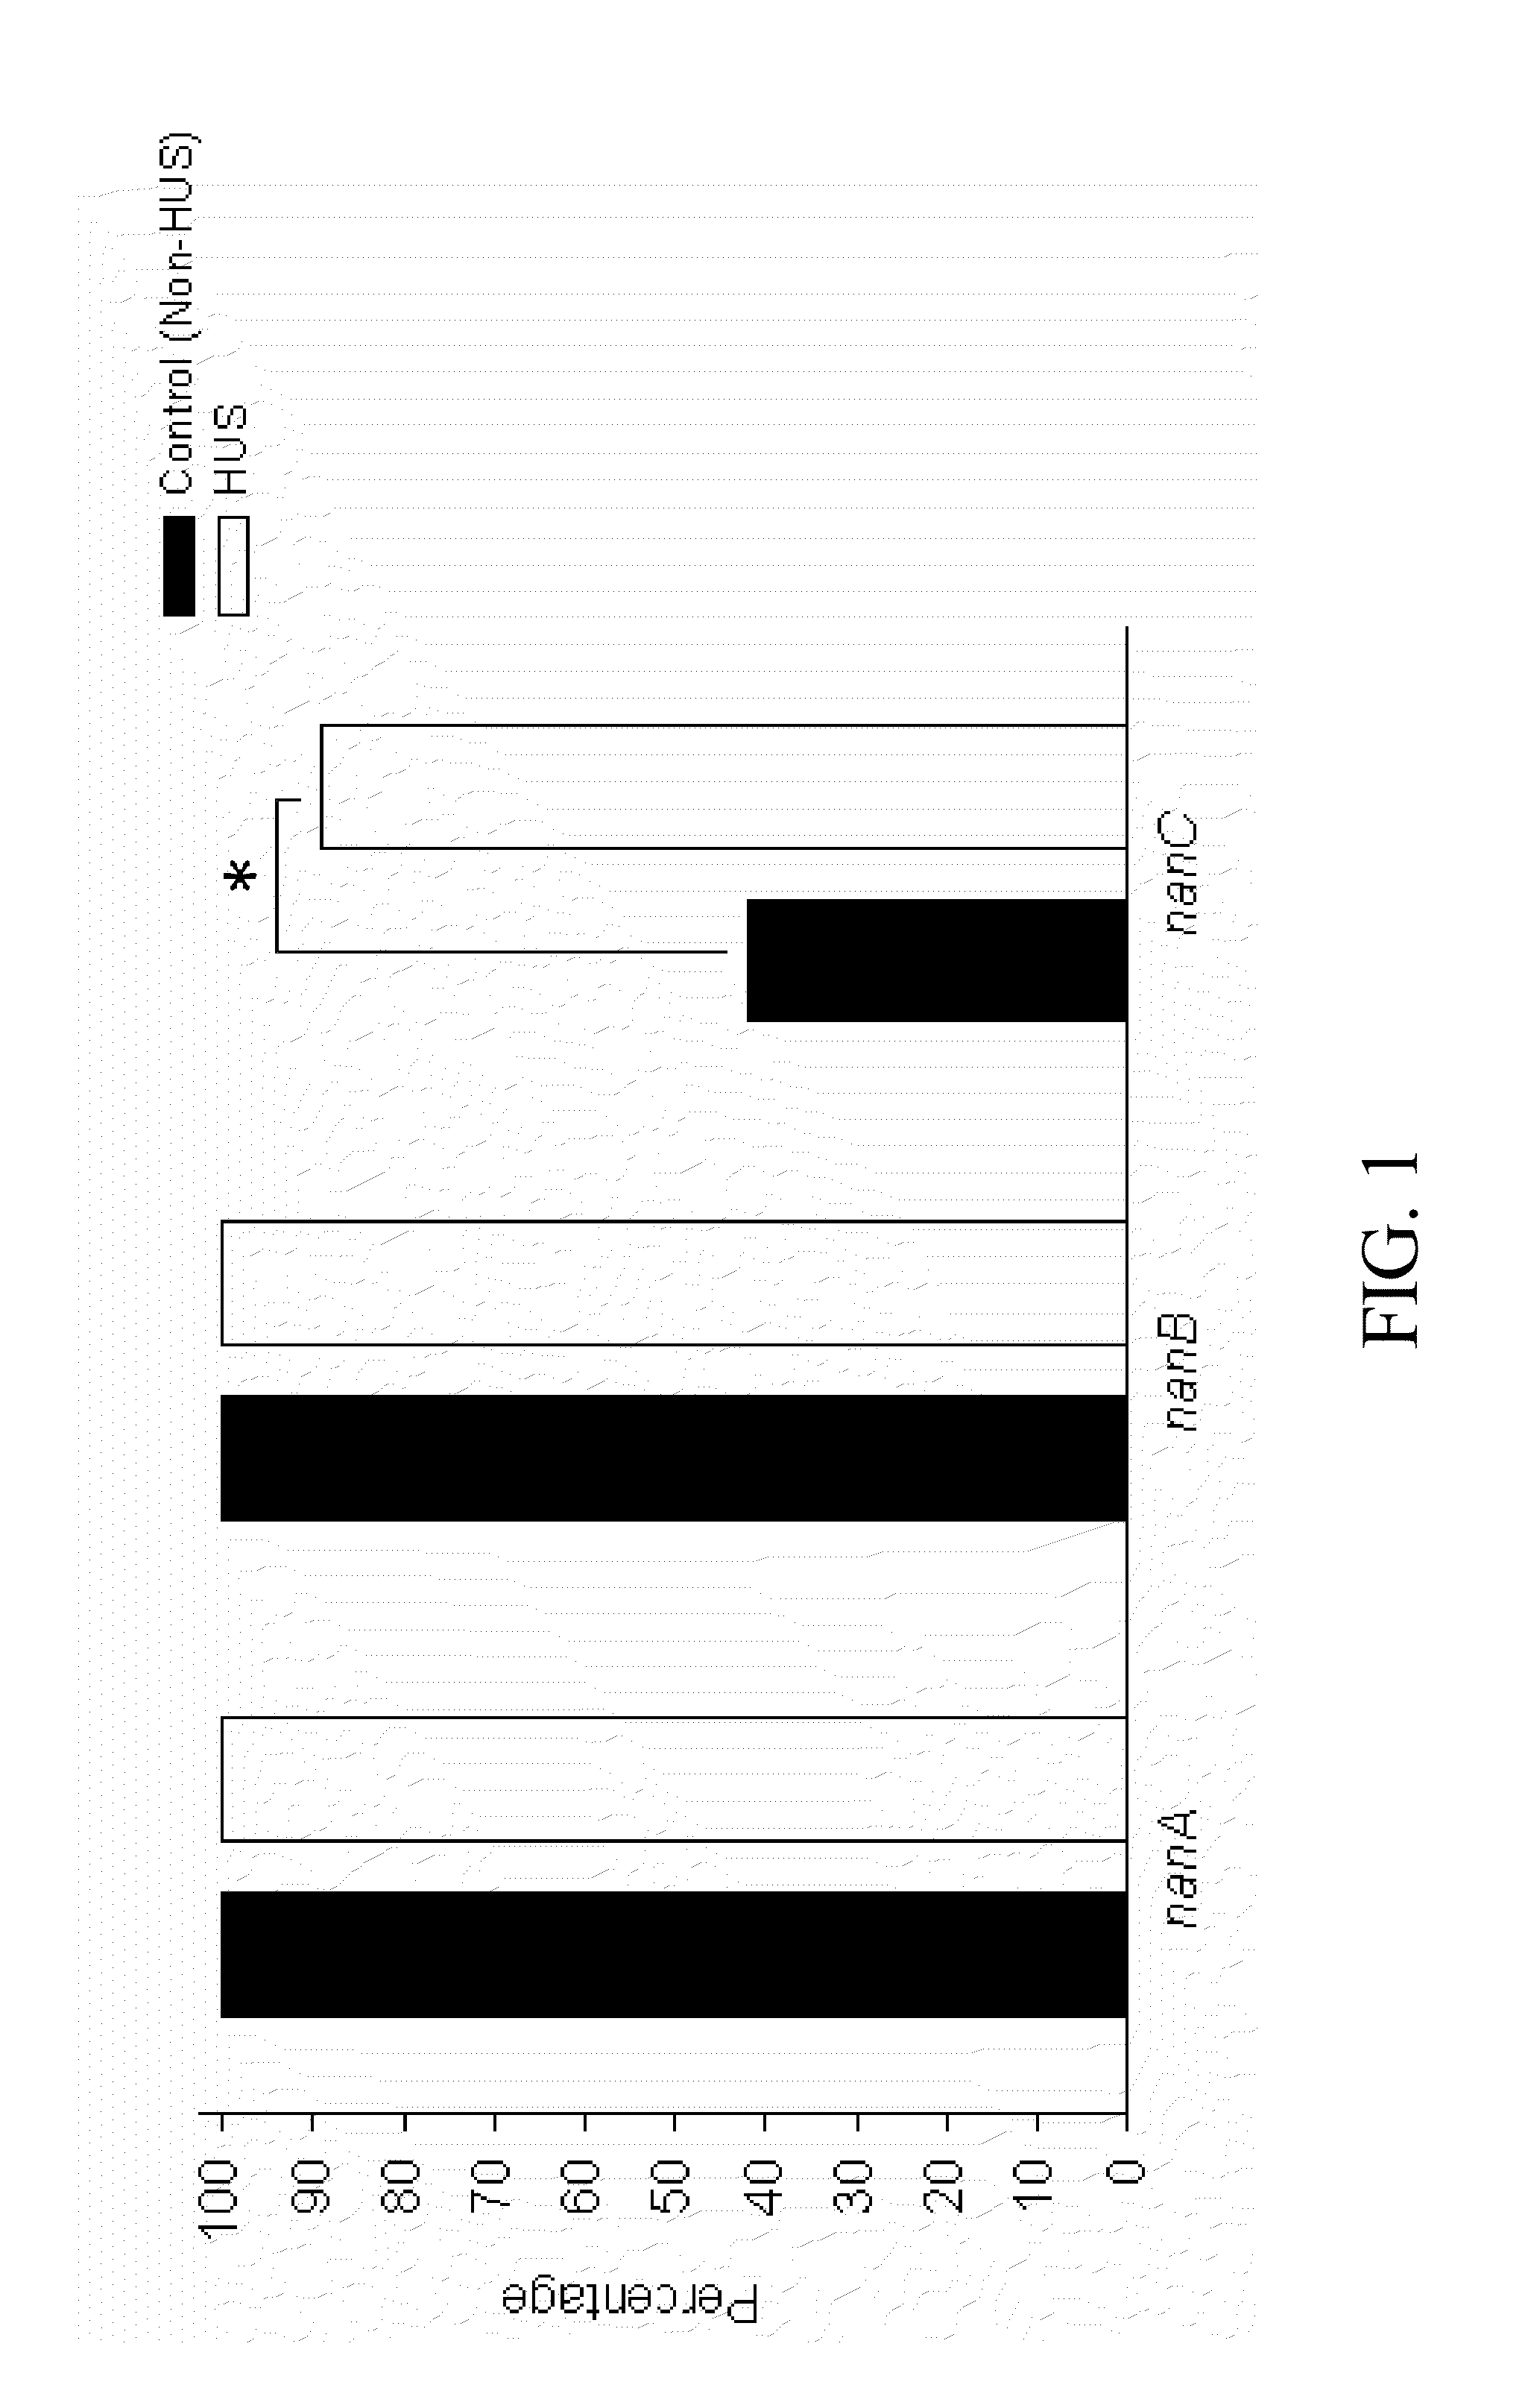 Method of diagnosing and preventing pneumococcal diseases using pneumococcal neuraminidases